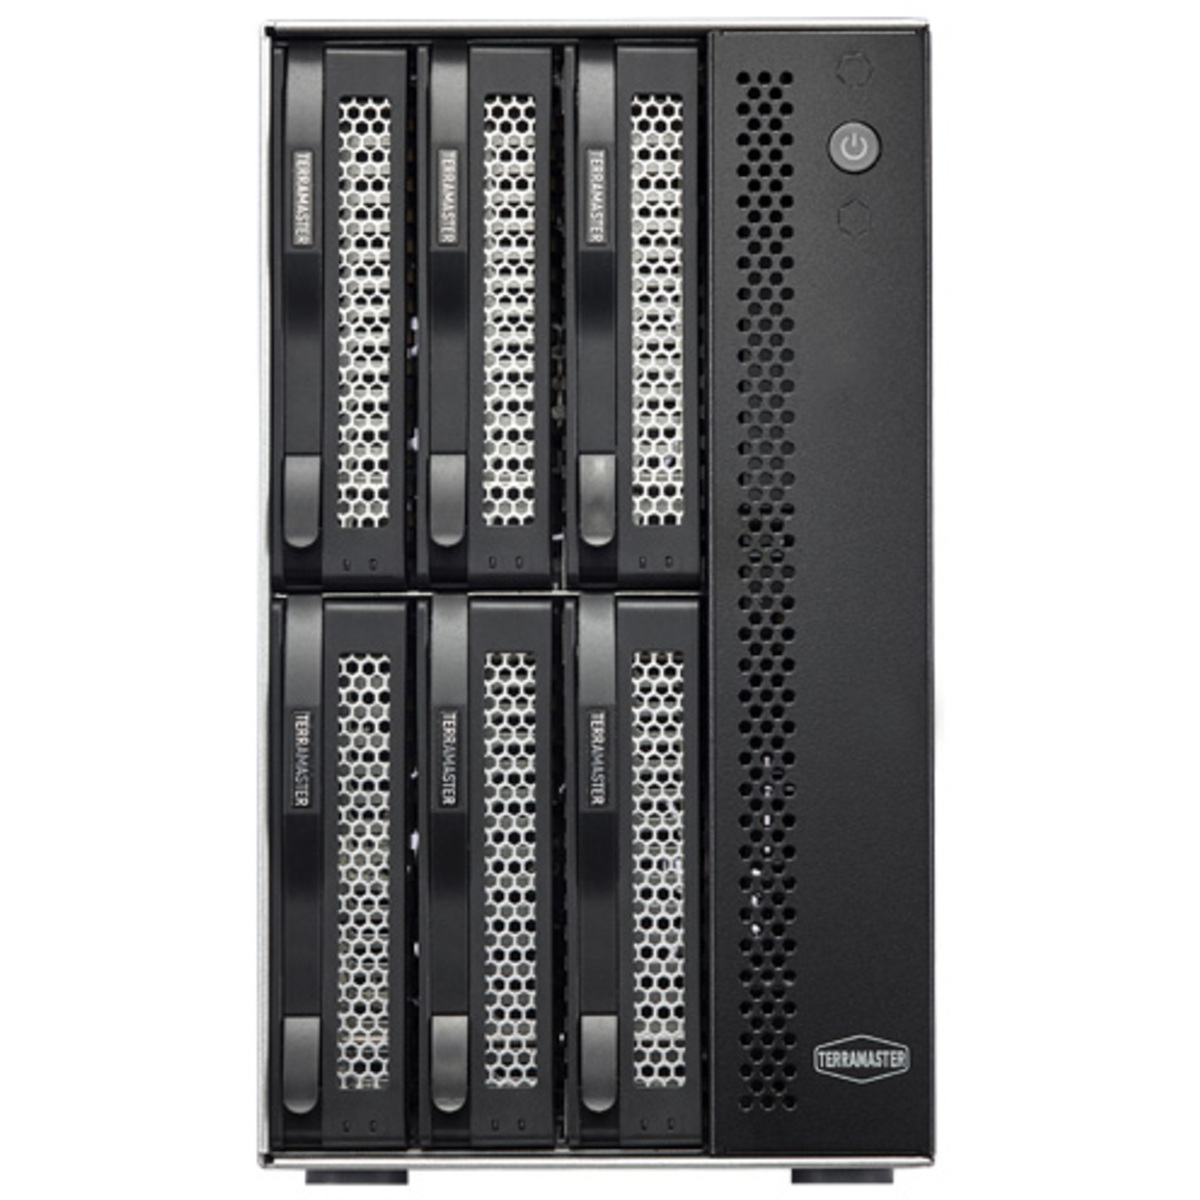 TerraMaster T6-423 24tb 6-Bay Desktop Multimedia / Power User / Business NAS - Network Attached Storage Device 3x8tb Seagate EXOS 7E10 ST8000NM017B 3.5 7200rpm SATA 6Gb/s HDD ENTERPRISE Class Drives Installed - Burn-In Tested - FREE RAM UPGRADE T6-423